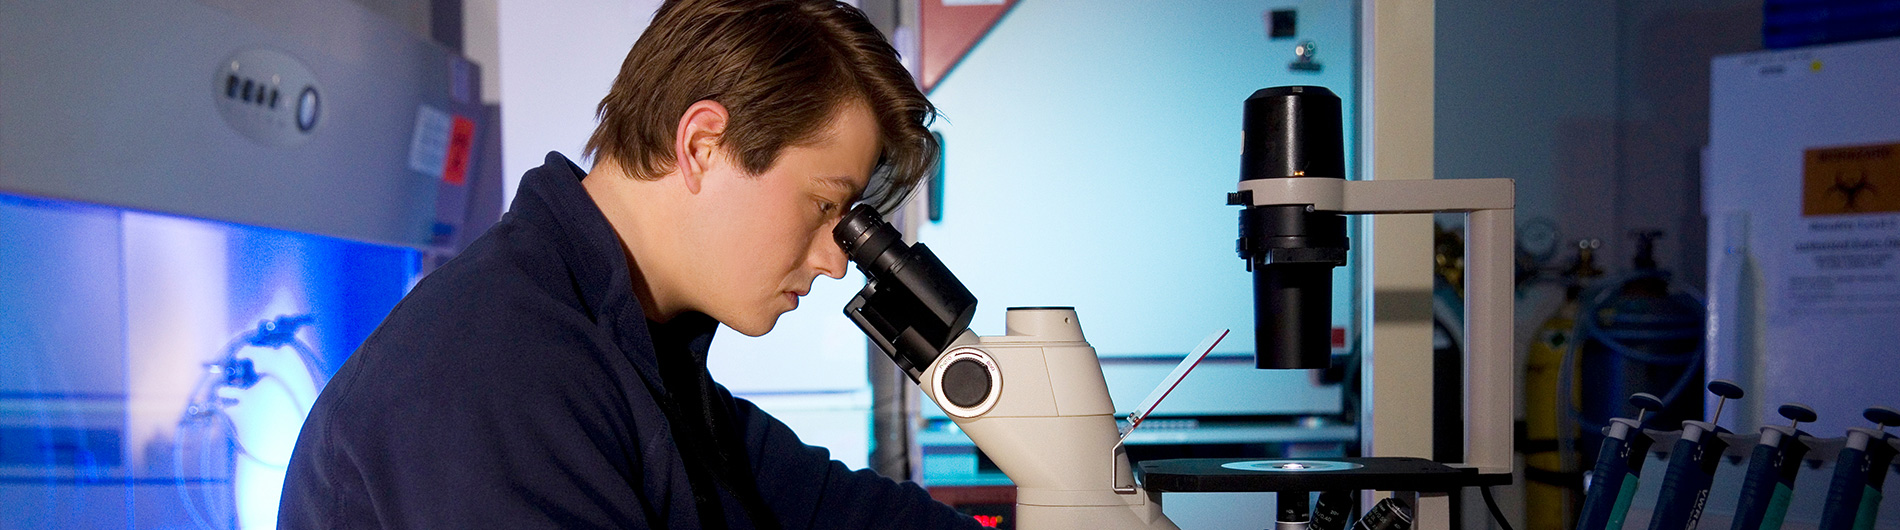 Researcher Looking into Microcope